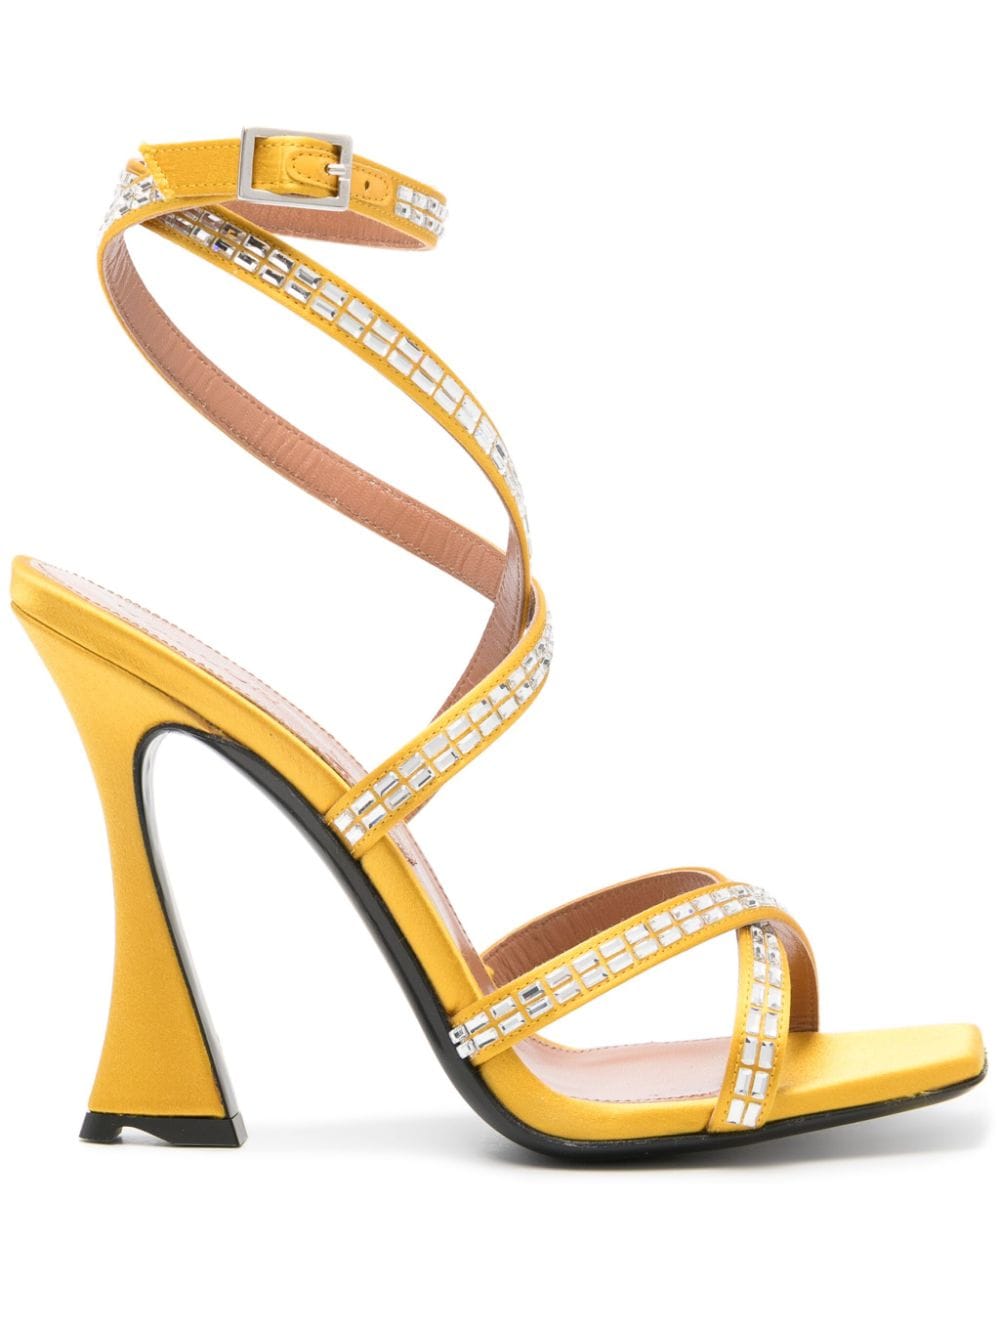 D'ACCORI 100mm Carre crystal-embellished sandals - Yellow